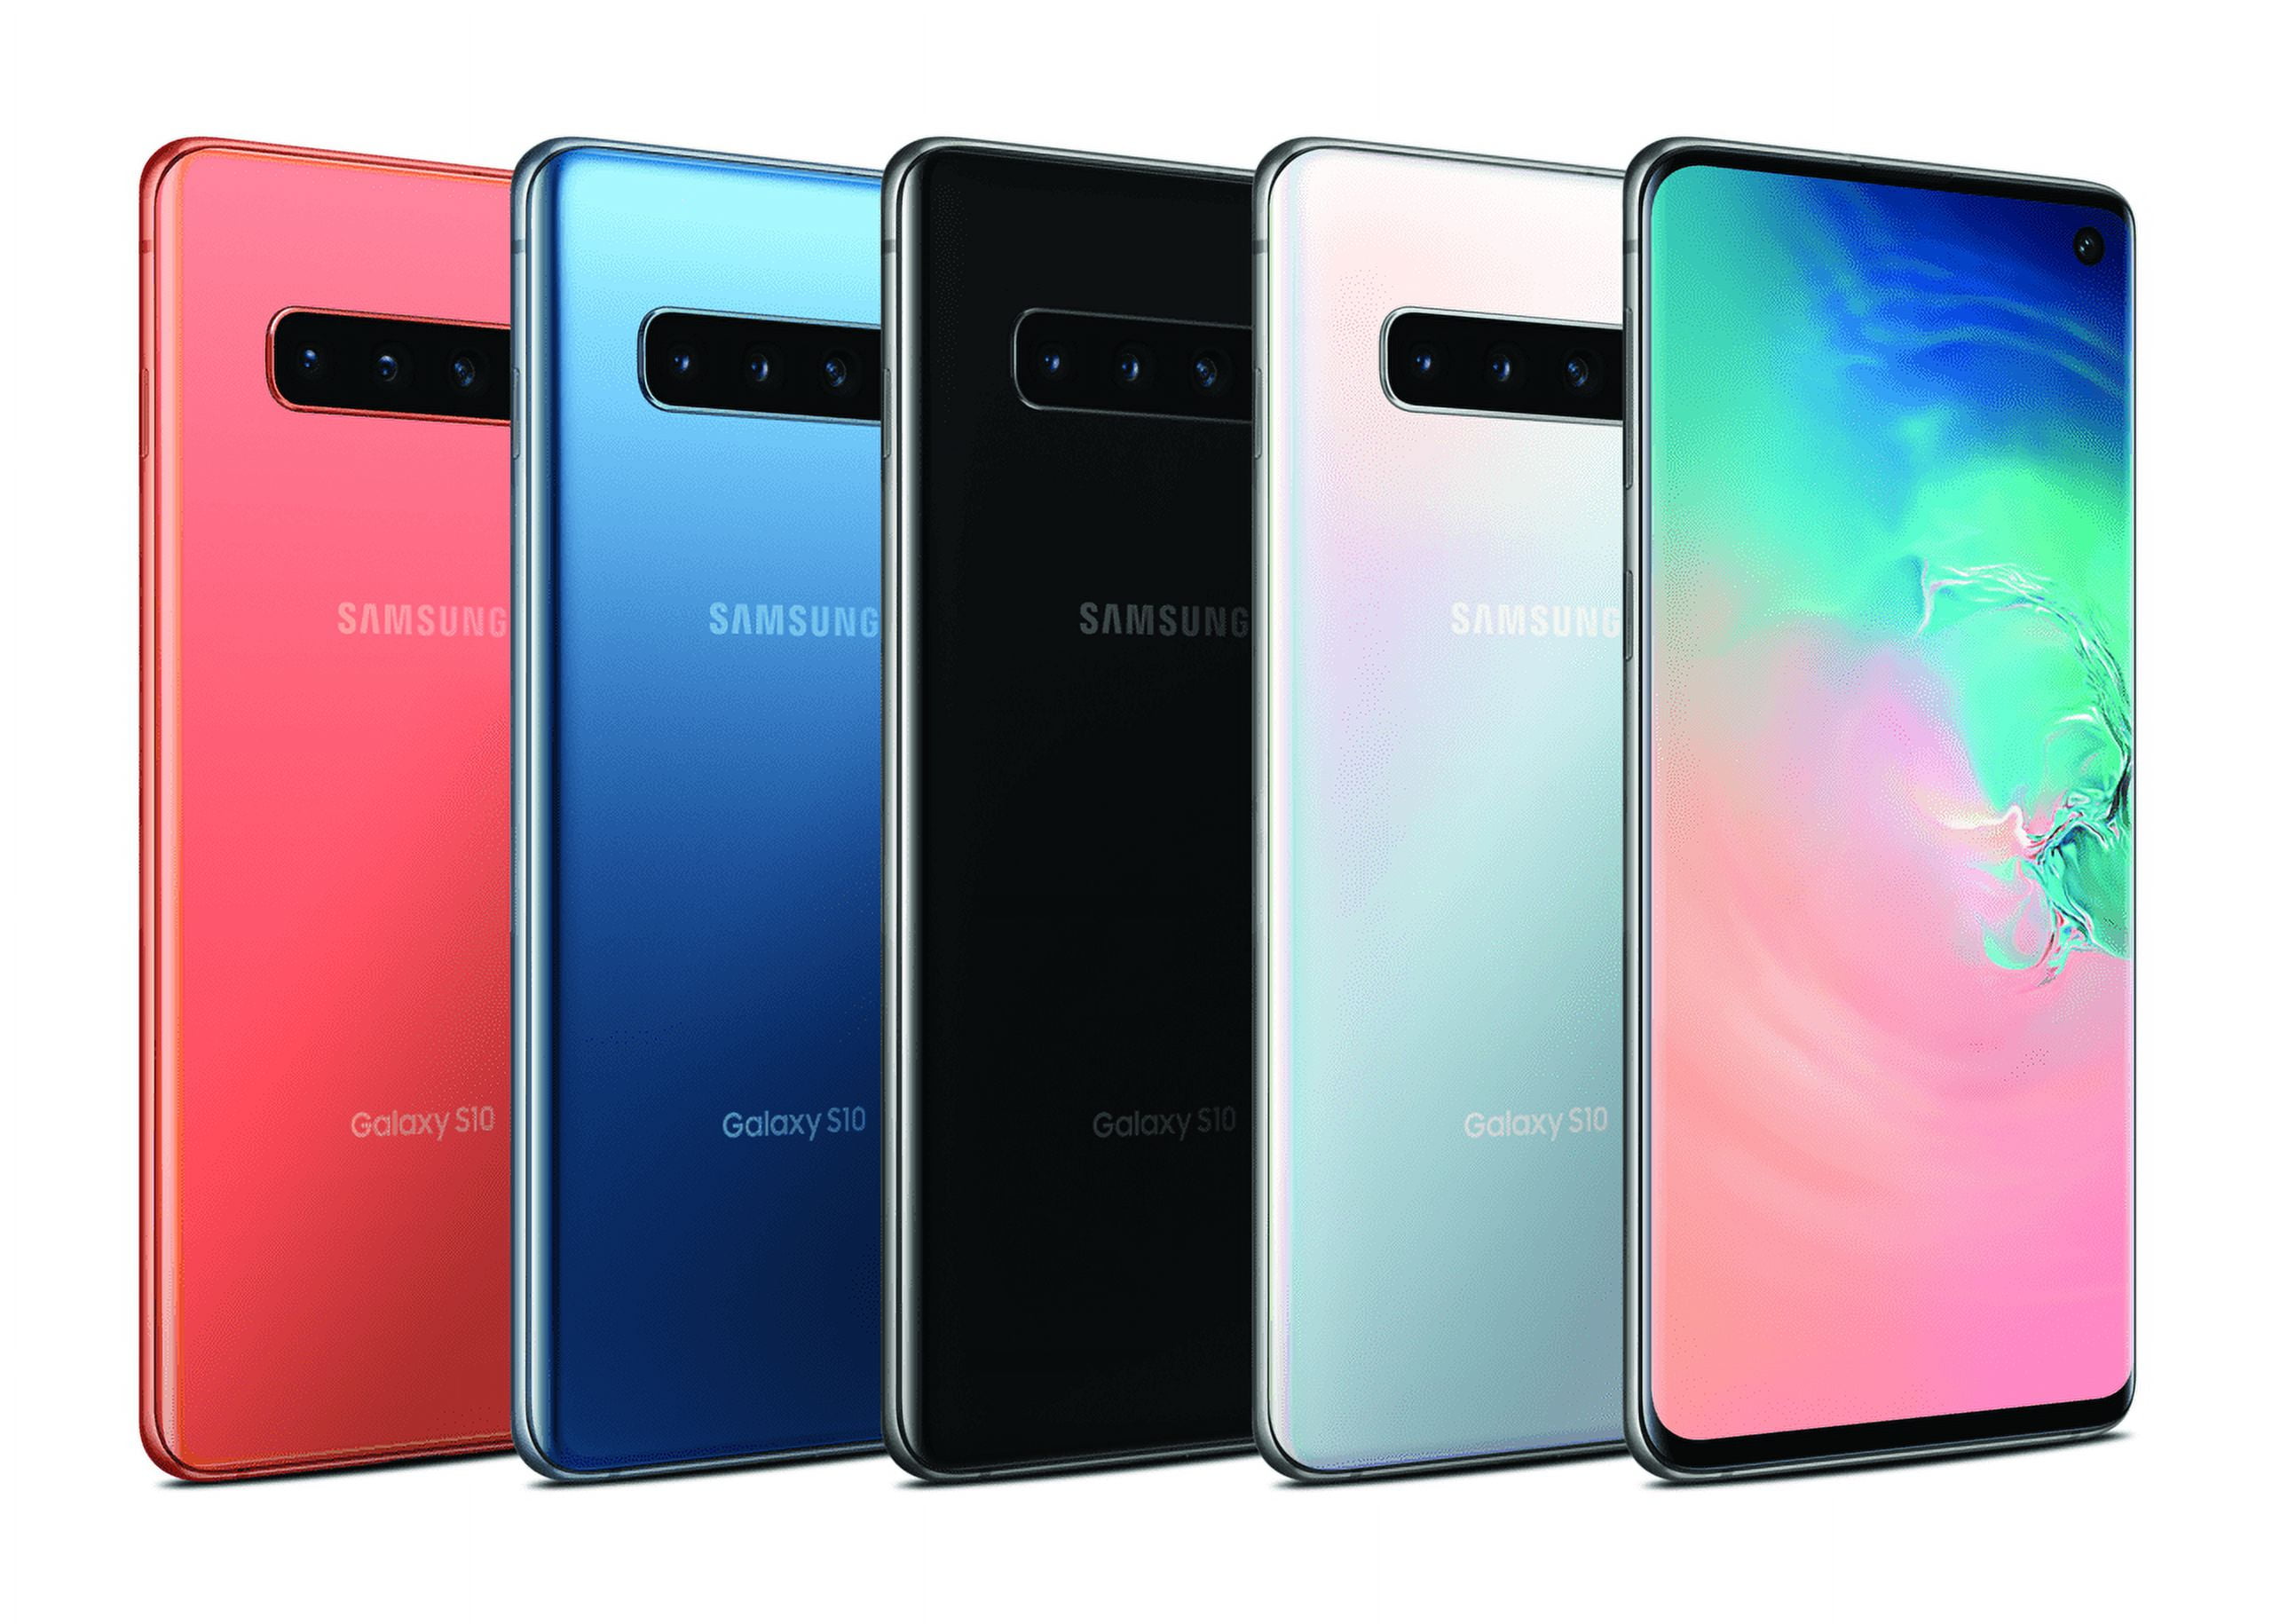 Best Android phone for business: One month with Samsung Galaxy S10 Plus